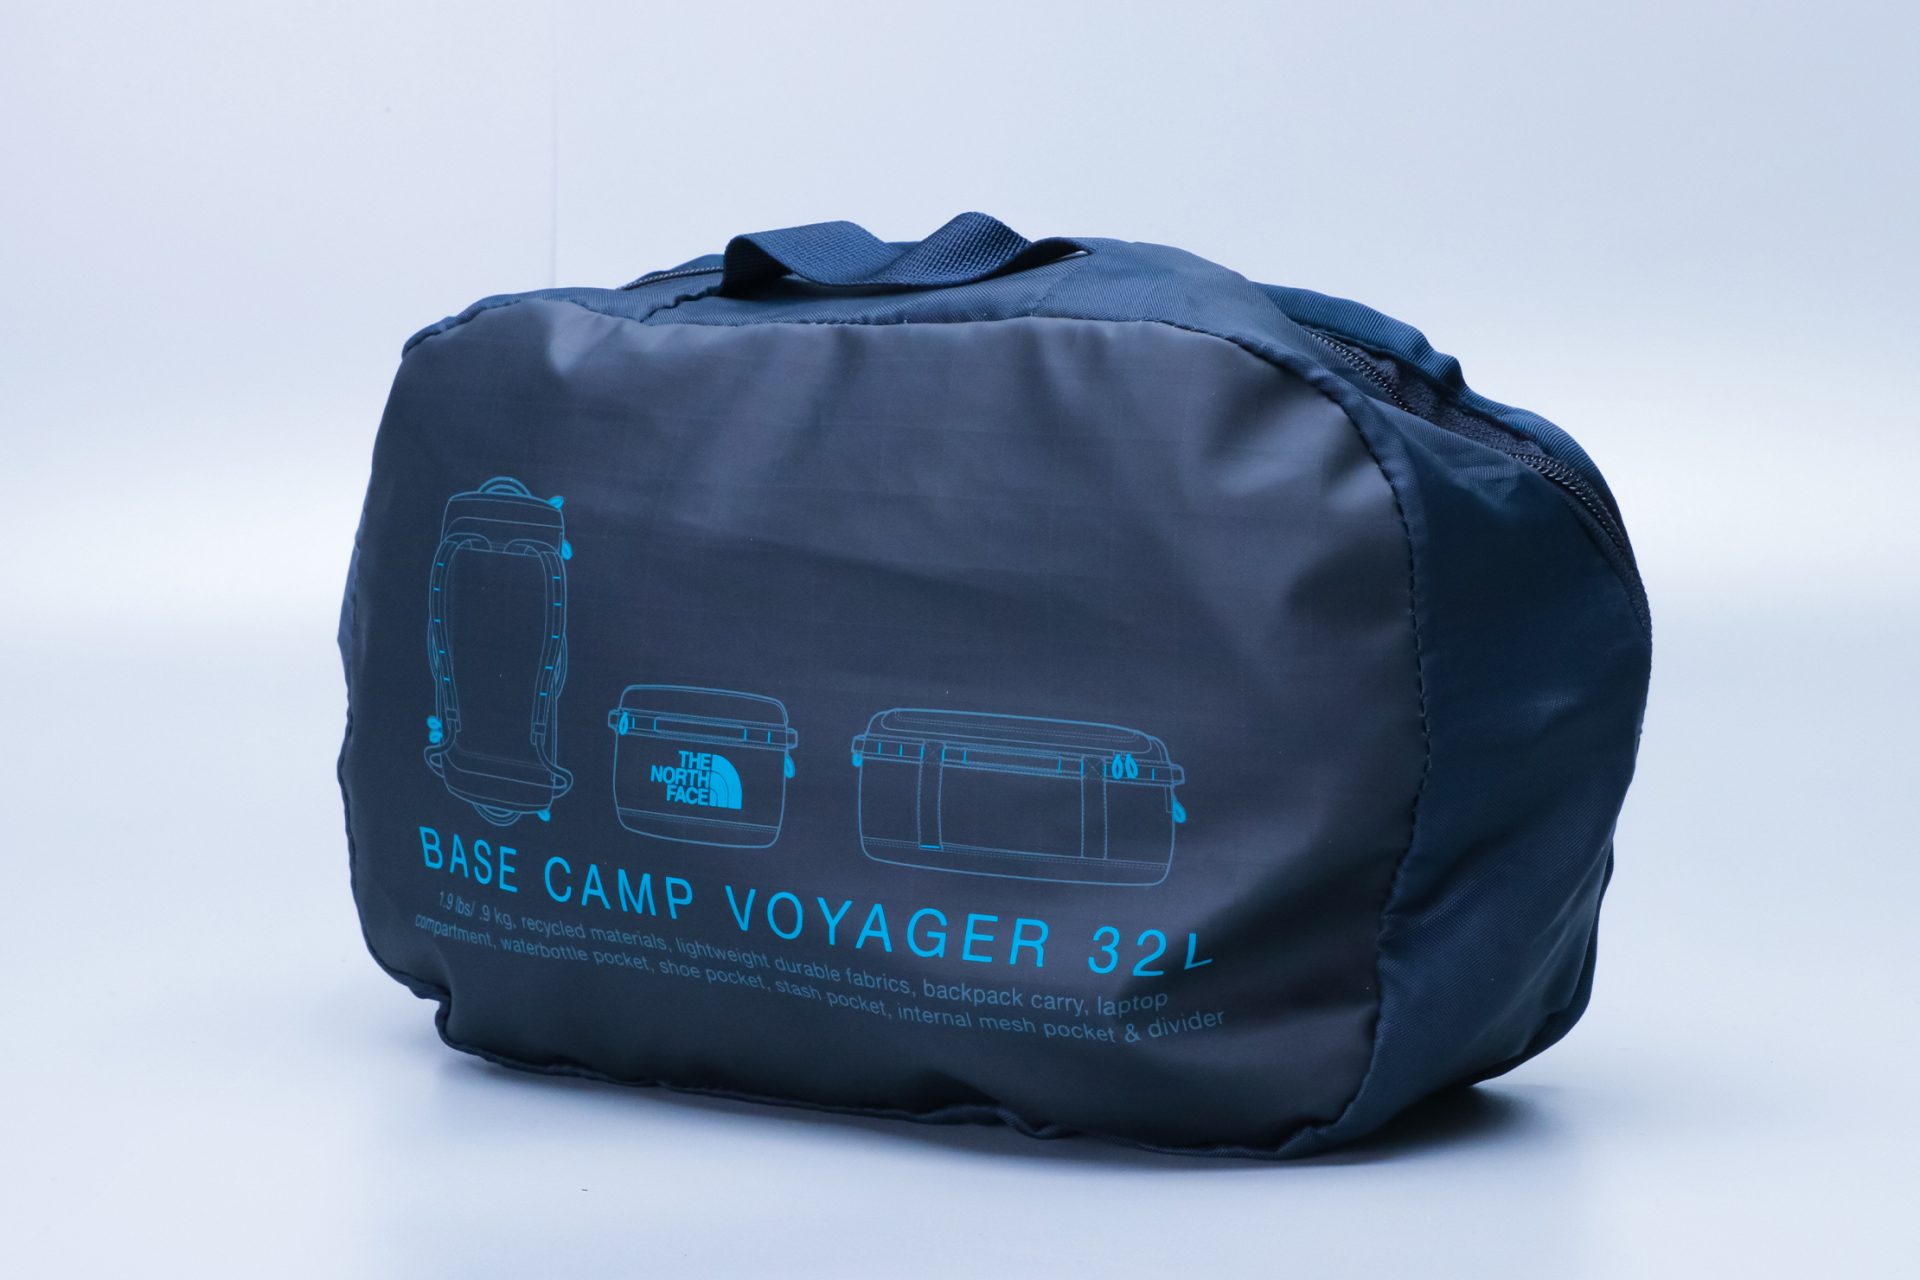 The North Face Base Camp Voyager 32L Compressed